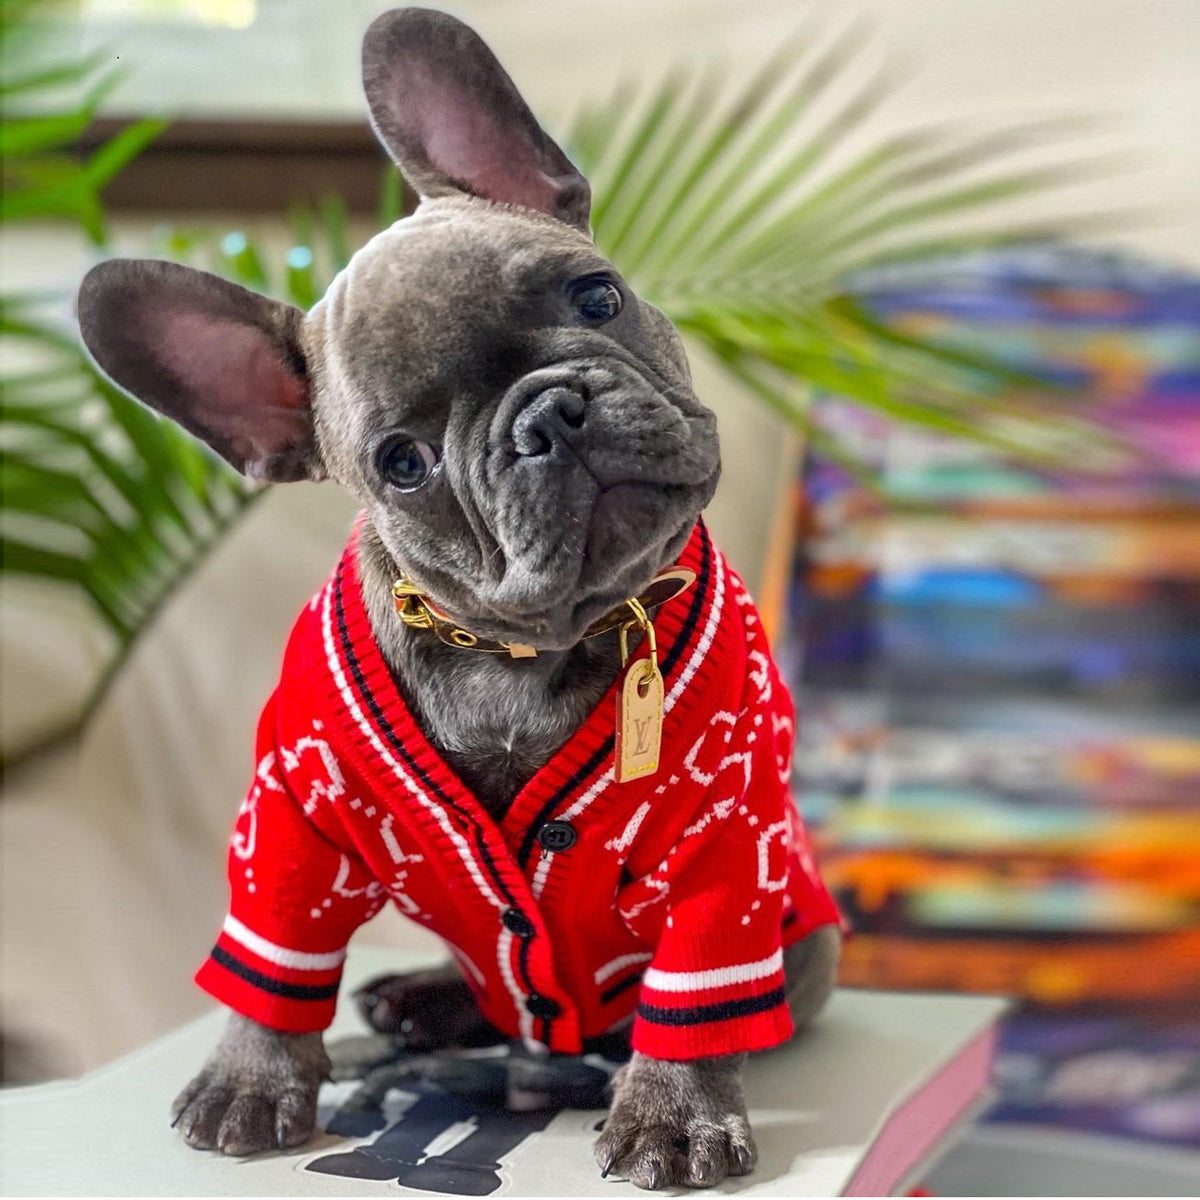 SnugglePup-Frenchie-Knit-Fashion-Winter-Sweater-www.frenchie.shop